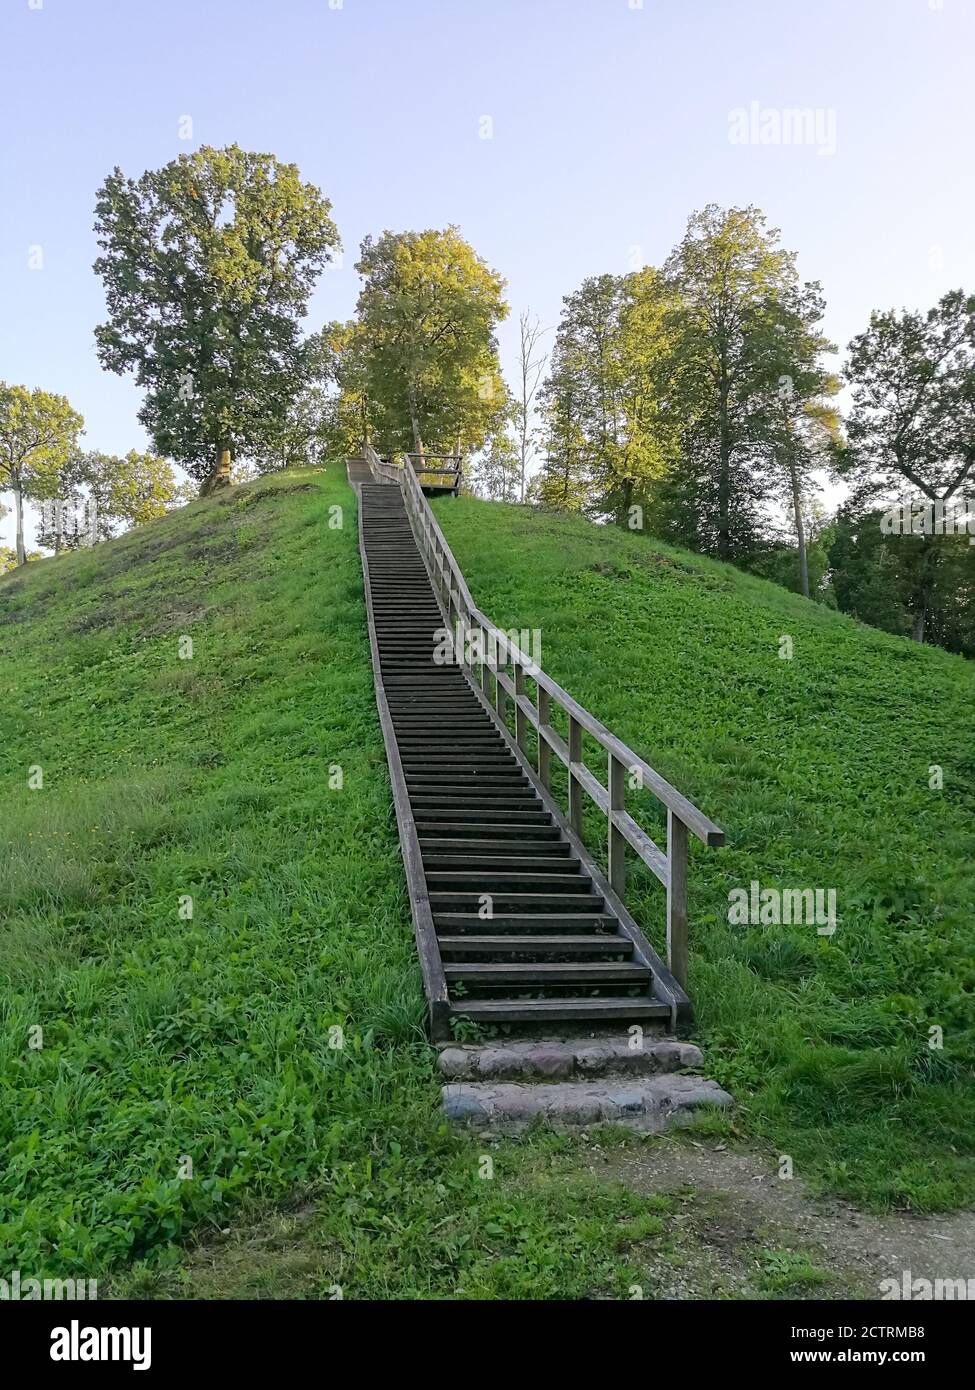 Zemosios Panemunes mound with wooden stairs in Lithuania Stock Photo